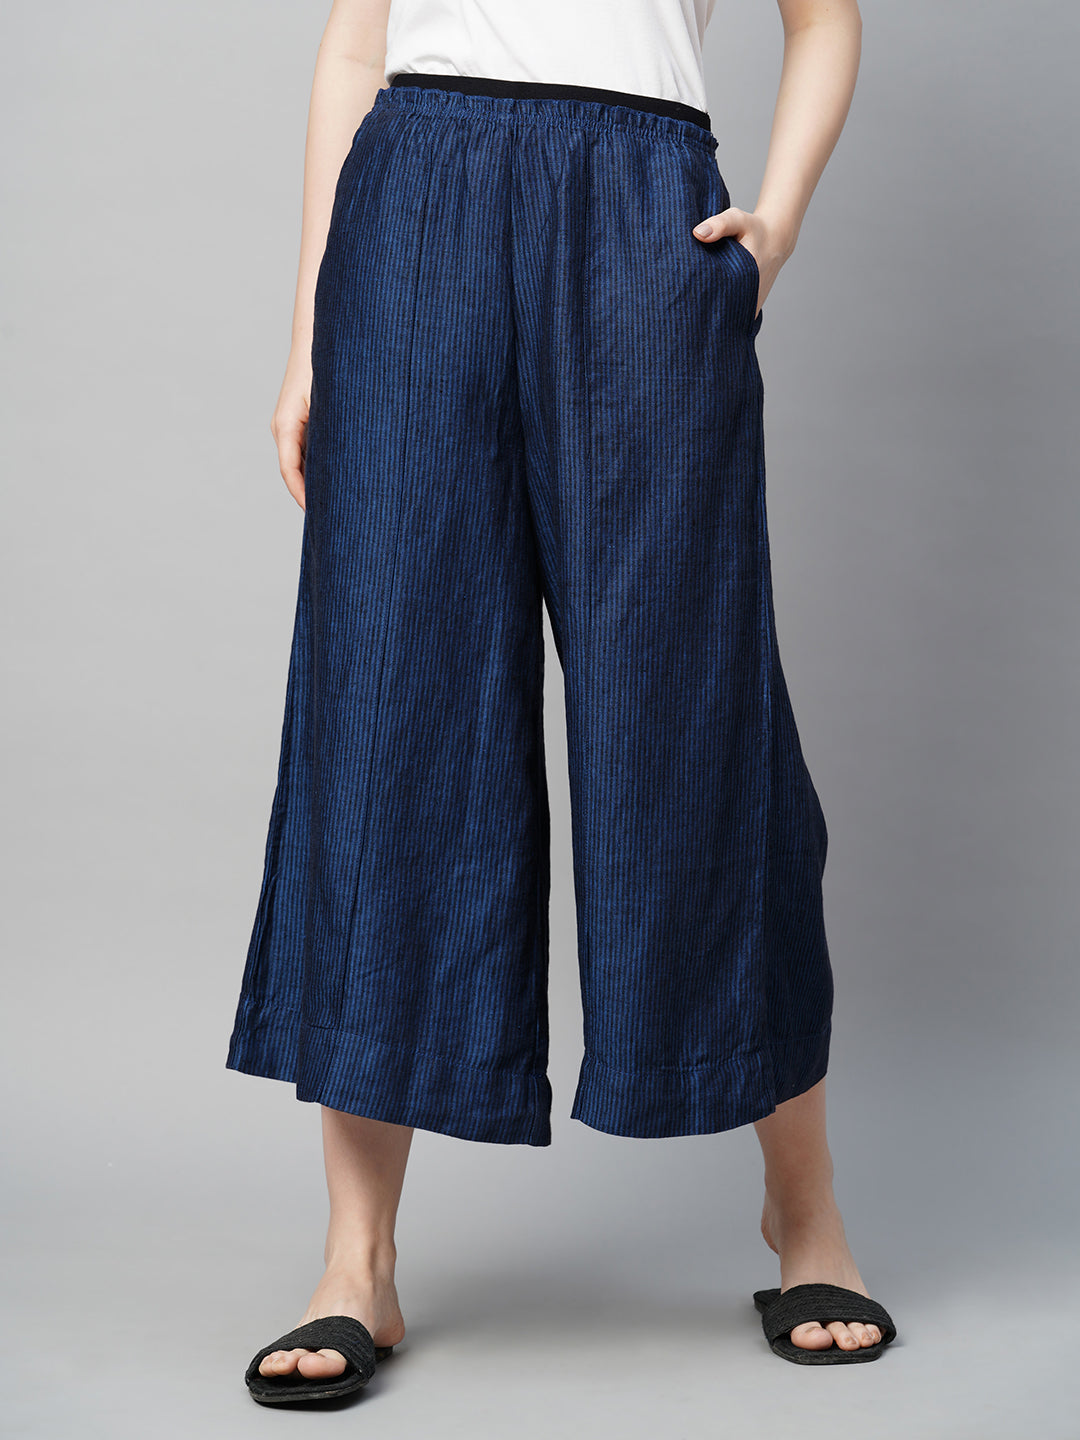 Culottes for women, Buy online